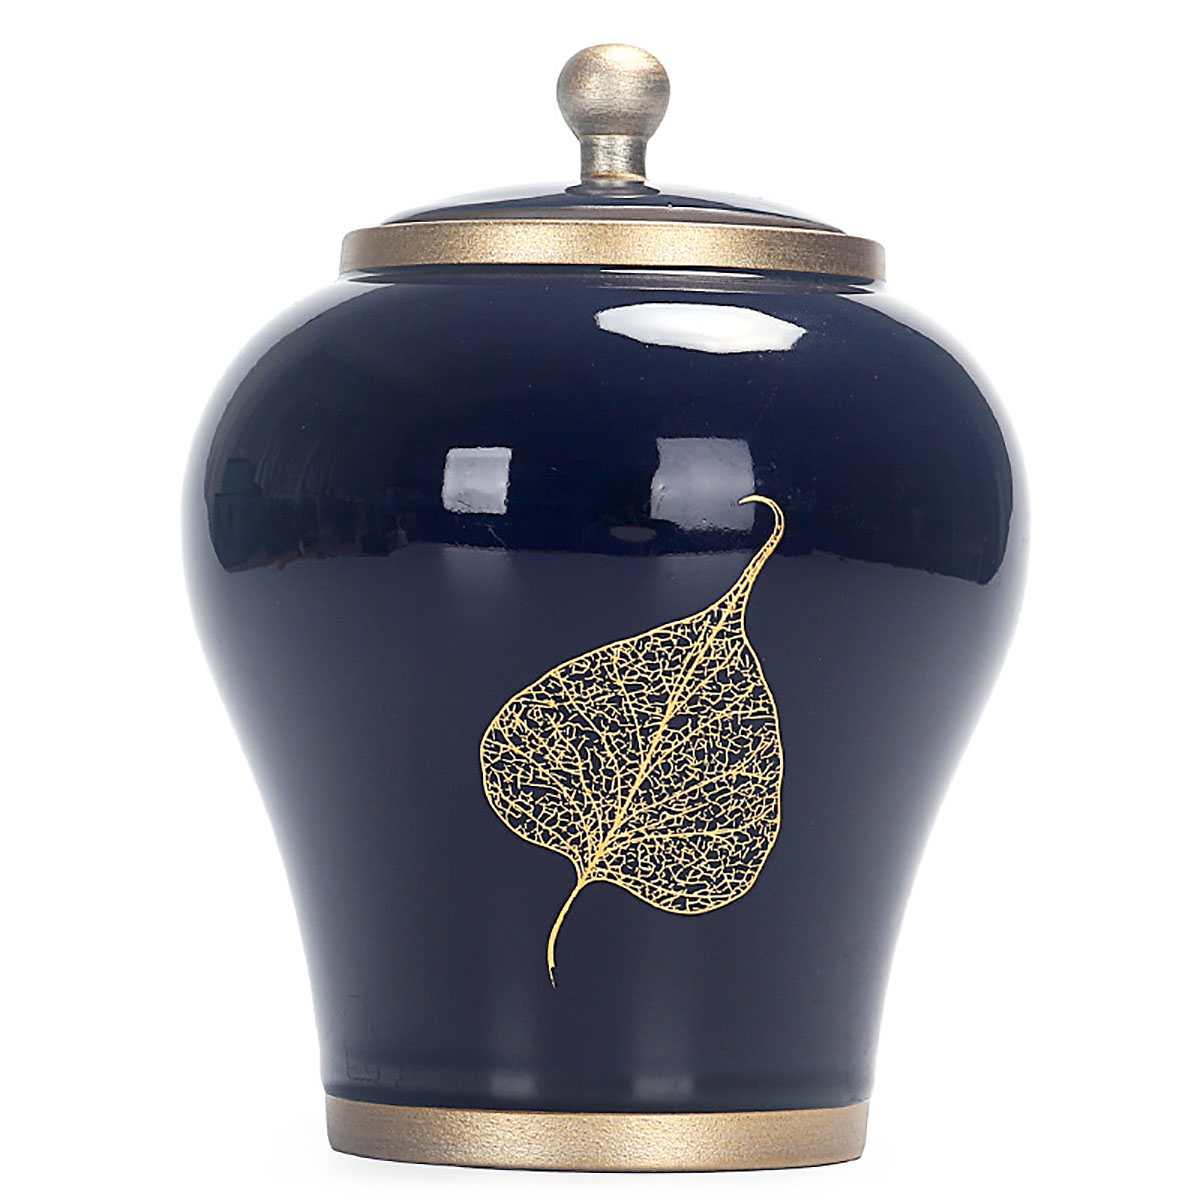 

Luxurious Gradient Glaze Ceramic Funeral Pet Cremation Urn Memorial Container for Ashes Storage tank